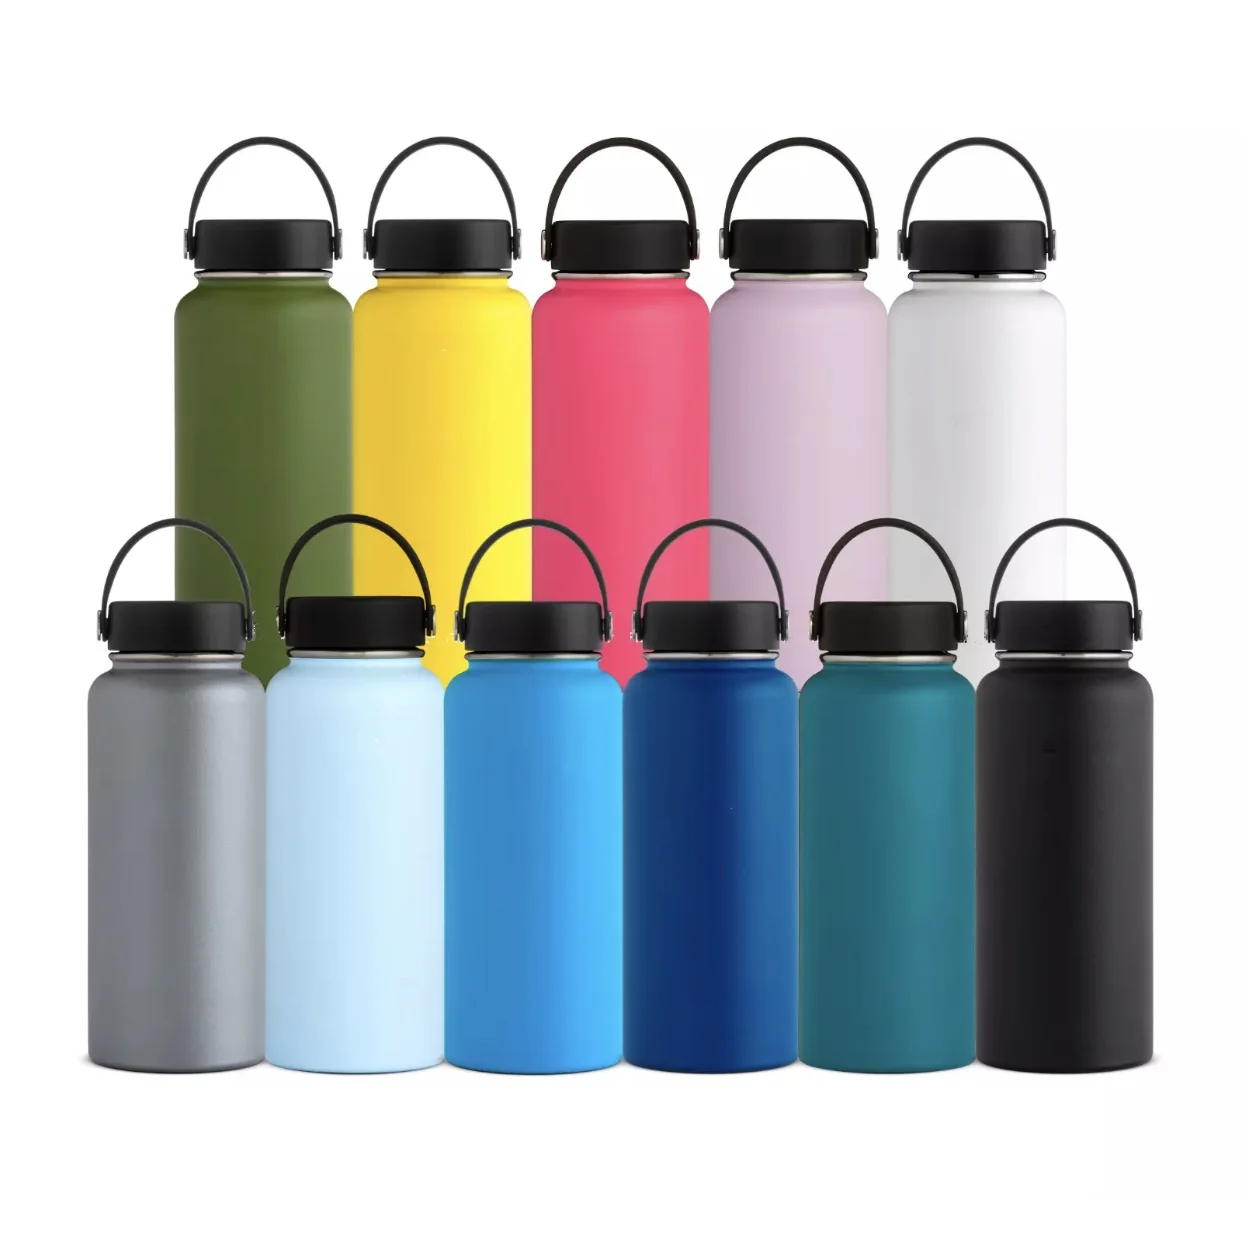 

32oz Stainless Steel Water Bottle w/Straw & Wide Mouth Lids Keeps Liquids Hot or Cold With Handle, Customized colors acceptable